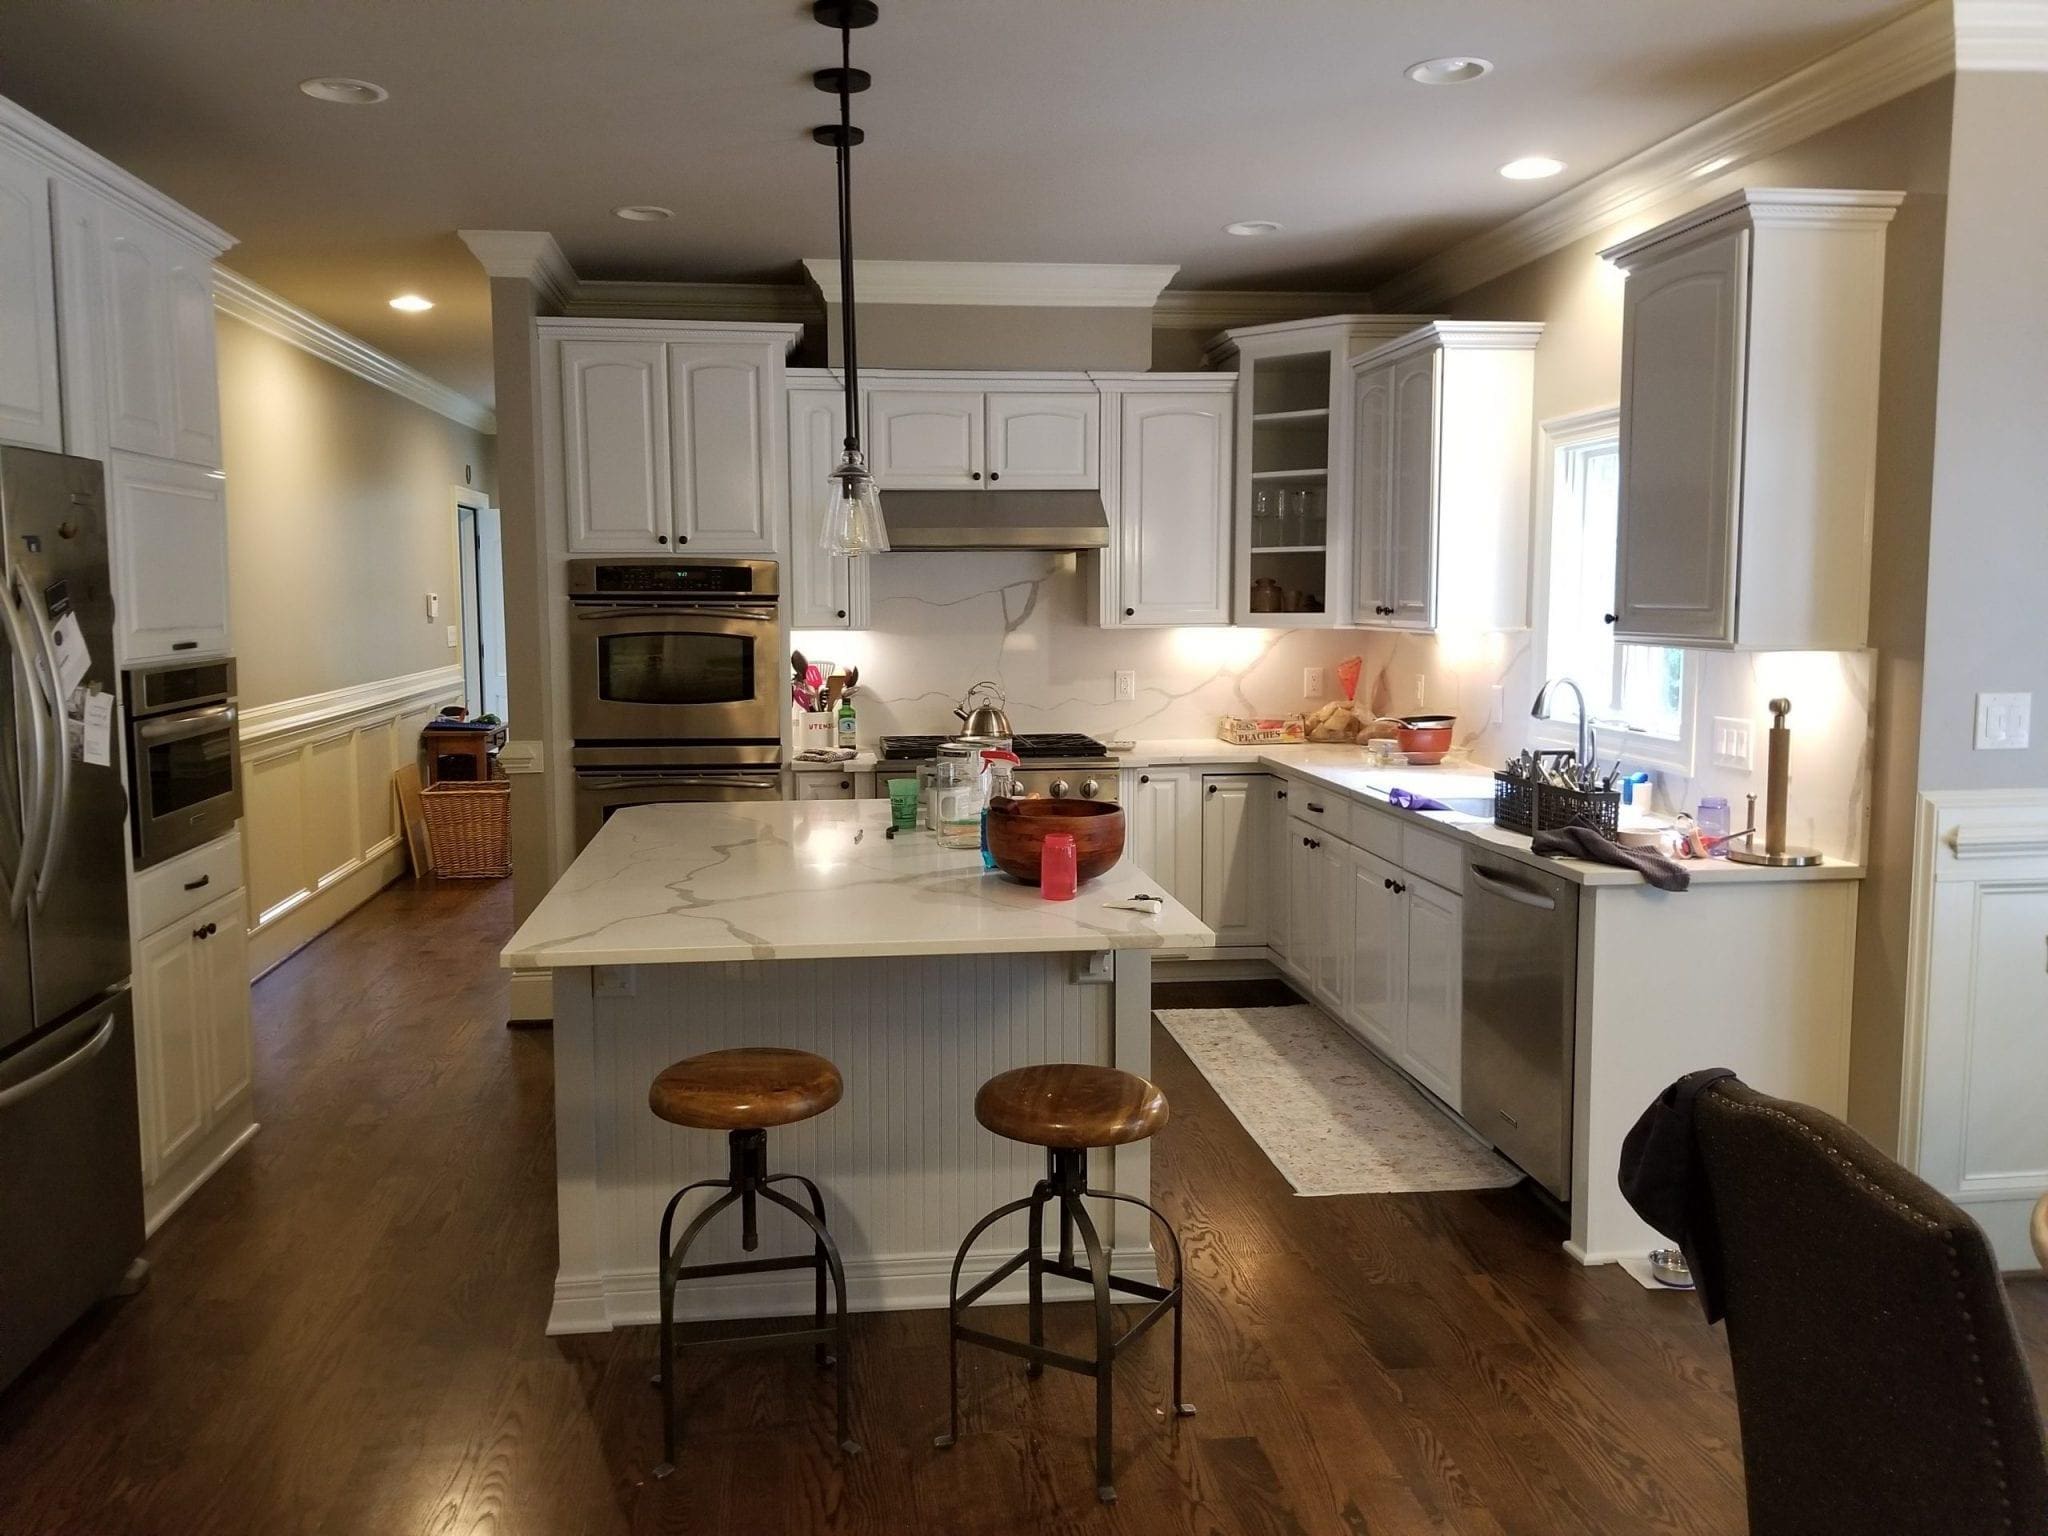 Refininshing Your Cabinets To Bring New Life To Your Home. 1